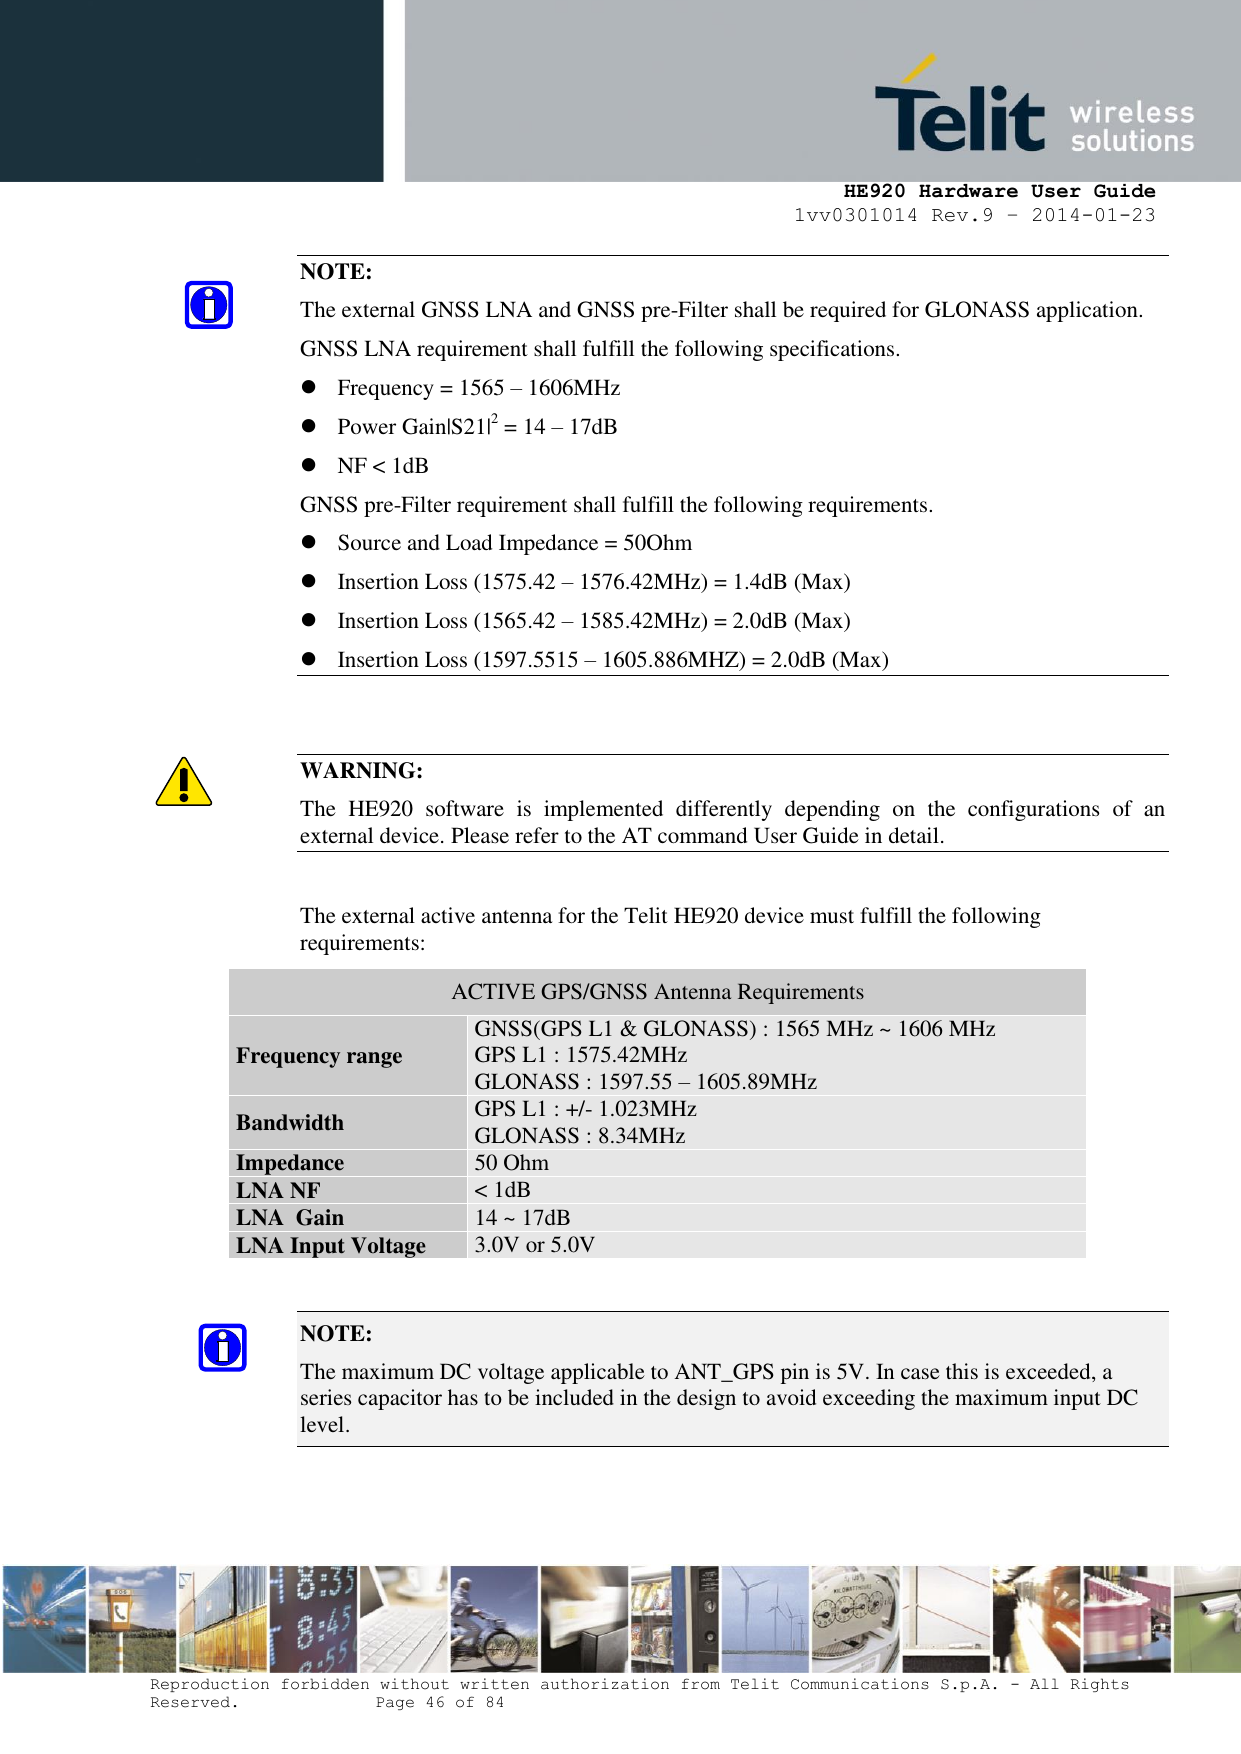     HE920 Hardware User Guide 1vv0301014 Rev.9 – 2014-01-23 Reproduction forbidden without written authorization from Telit Communications S.p.A. - All Rights Reserved.    Page 46 of 84  NOTE: The external GNSS LNA and GNSS pre-Filter shall be required for GLONASS application. GNSS LNA requirement shall fulfill the following specifications.  Frequency = 1565 – 1606MHz  Power Gain|S21|2 = 14 – 17dB  NF &lt; 1dB GNSS pre-Filter requirement shall fulfill the following requirements.  Source and Load Impedance = 50Ohm  Insertion Loss (1575.42 – 1576.42MHz) = 1.4dB (Max)  Insertion Loss (1565.42 – 1585.42MHz) = 2.0dB (Max)  Insertion Loss (1597.5515 – 1605.886MHZ) = 2.0dB (Max)   WARNING: The  HE920  software  is  implemented  differently  depending  on  the  configurations  of  an external device. Please refer to the AT command User Guide in detail.  The external active antenna for the Telit HE920 device must fulfill the following requirements: ACTIVE GPS/GNSS Antenna Requirements Frequency range GNSS(GPS L1 &amp; GLONASS) : 1565 MHz ~ 1606 MHz GPS L1 : 1575.42MHz GLONASS : 1597.55 – 1605.89MHz Bandwidth GPS L1 : +/- 1.023MHz GLONASS : 8.34MHz Impedance 50 Ohm LNA NF &lt; 1dB LNA  Gain 14 ~ 17dB LNA Input Voltage 3.0V or 5.0V  NOTE:  The maximum DC voltage applicable to ANT_GPS pin is 5V. In case this is exceeded, a series capacitor has to be included in the design to avoid exceeding the maximum input DC level.    